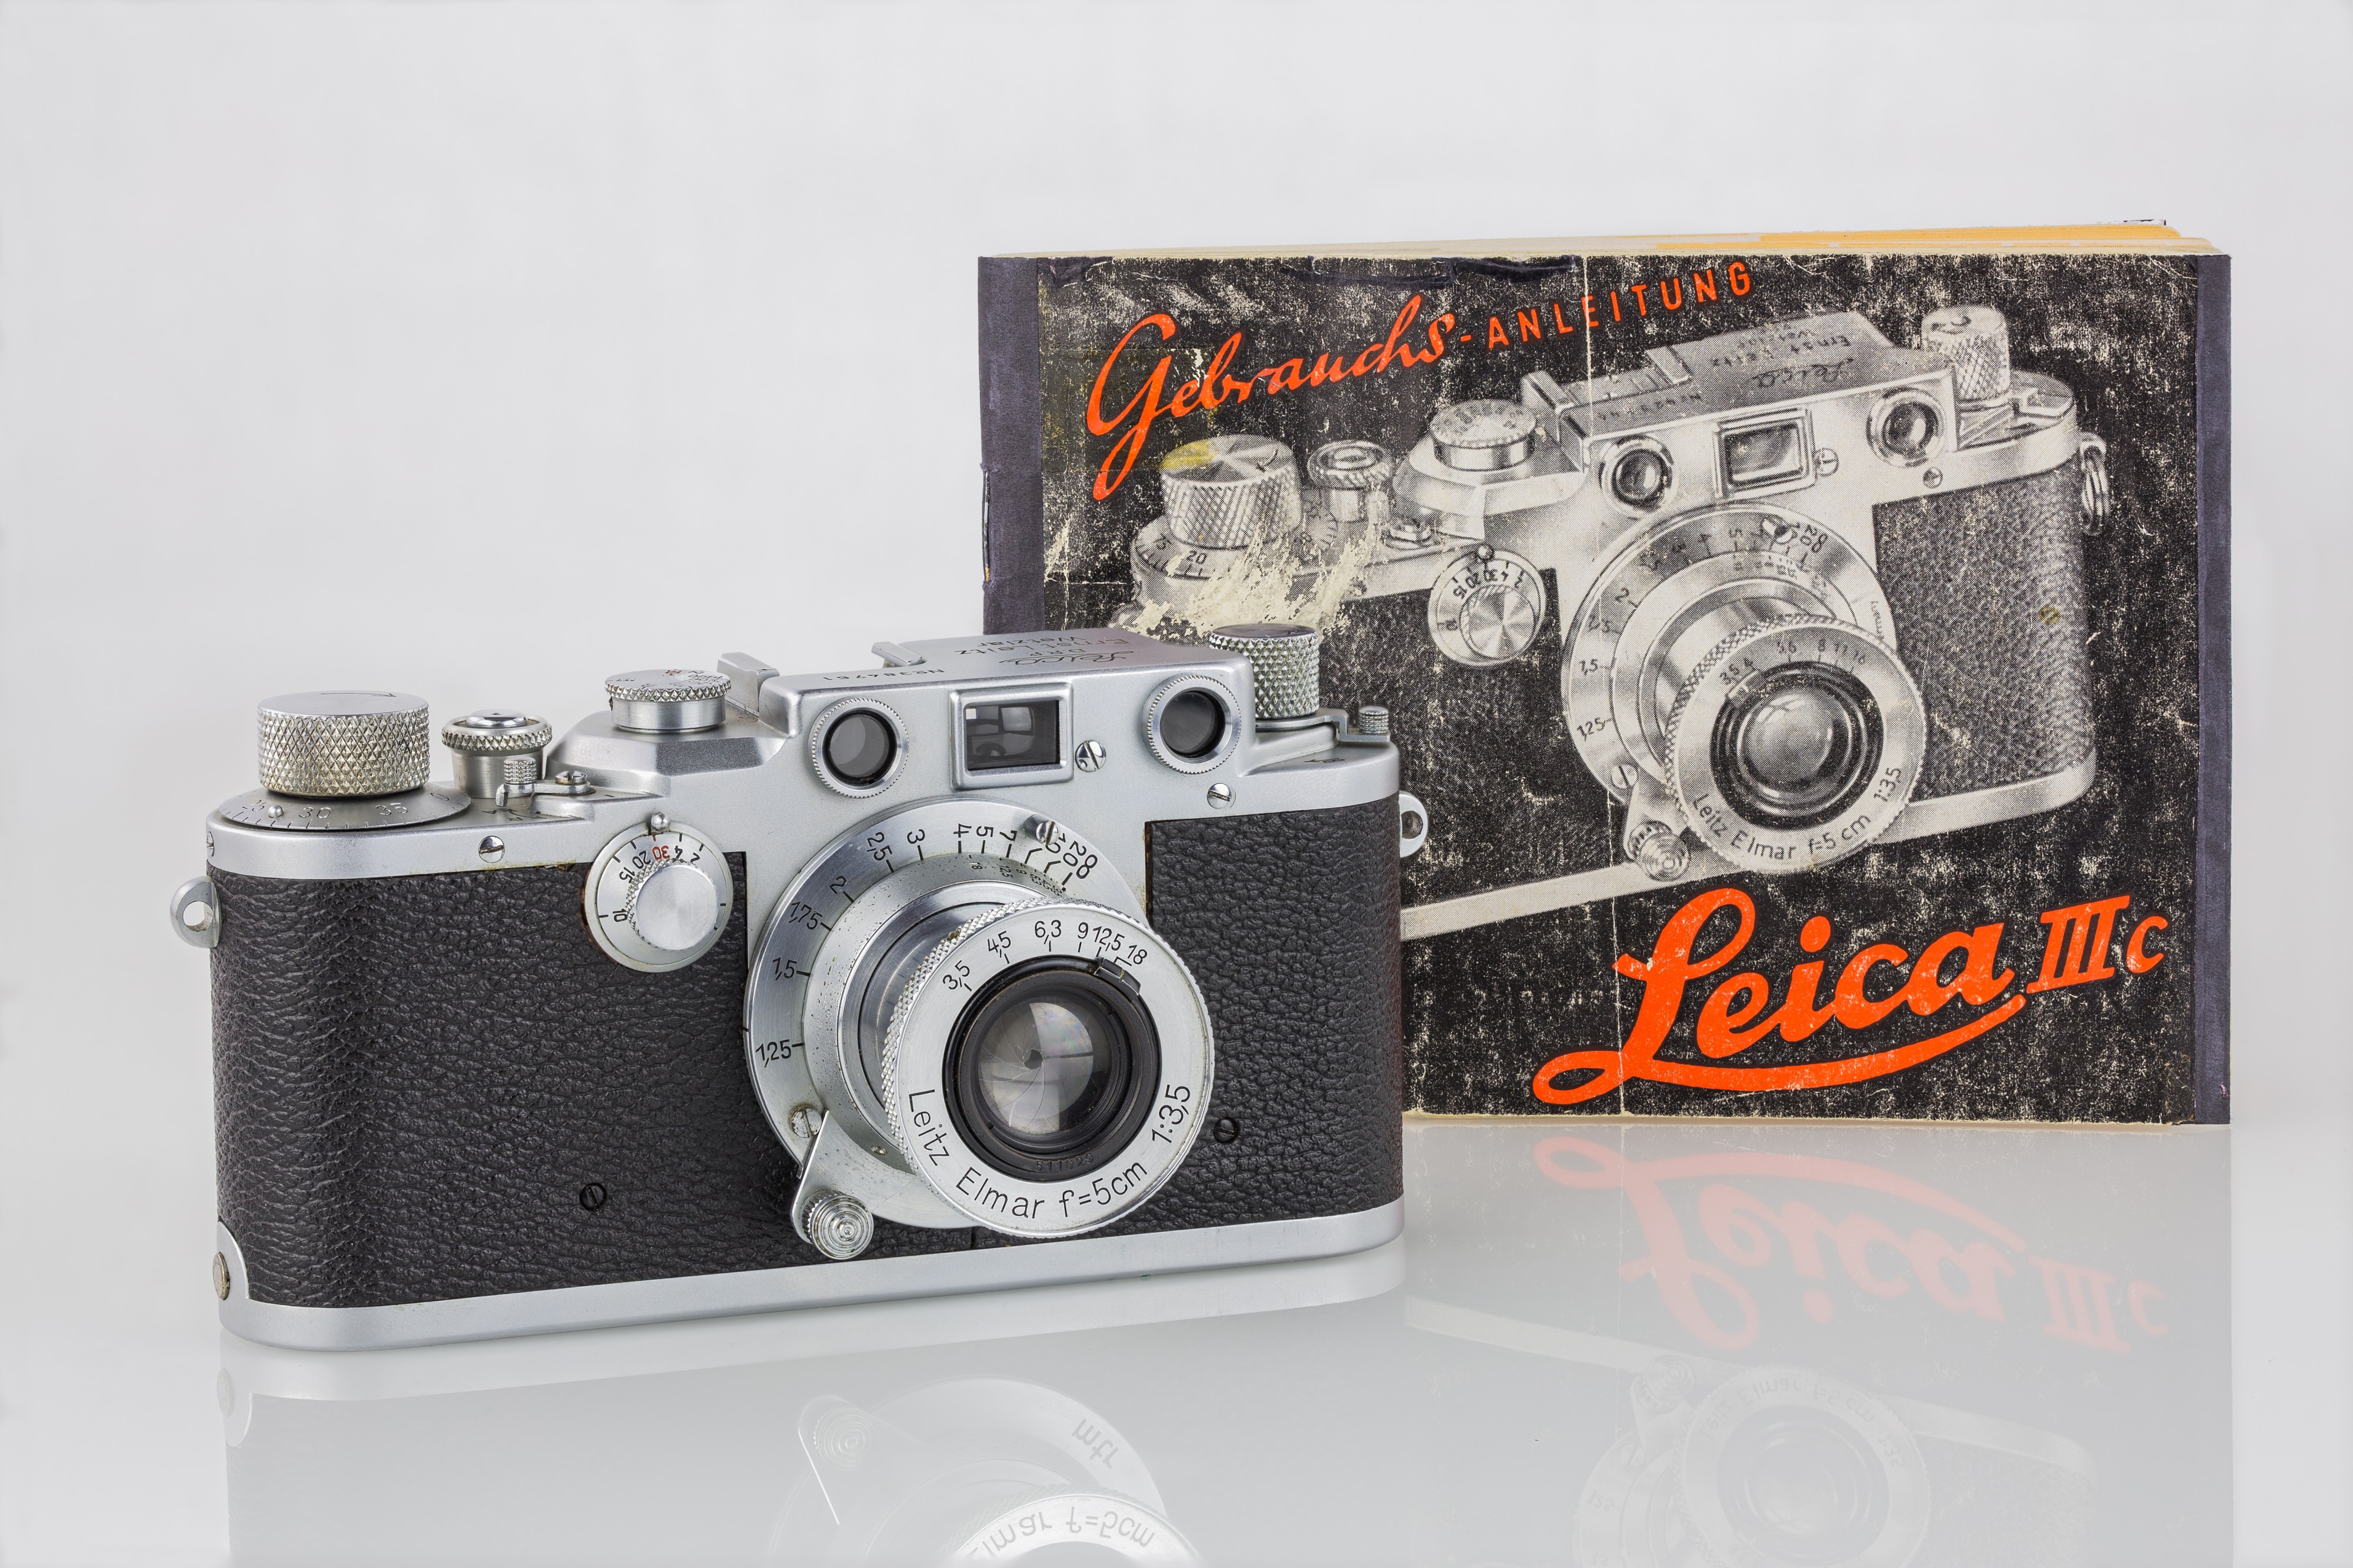 LEI0320 189 Leica IIIc chrome - Sn. 384761 1941-M39 Front view with brochure-Bearbeitet